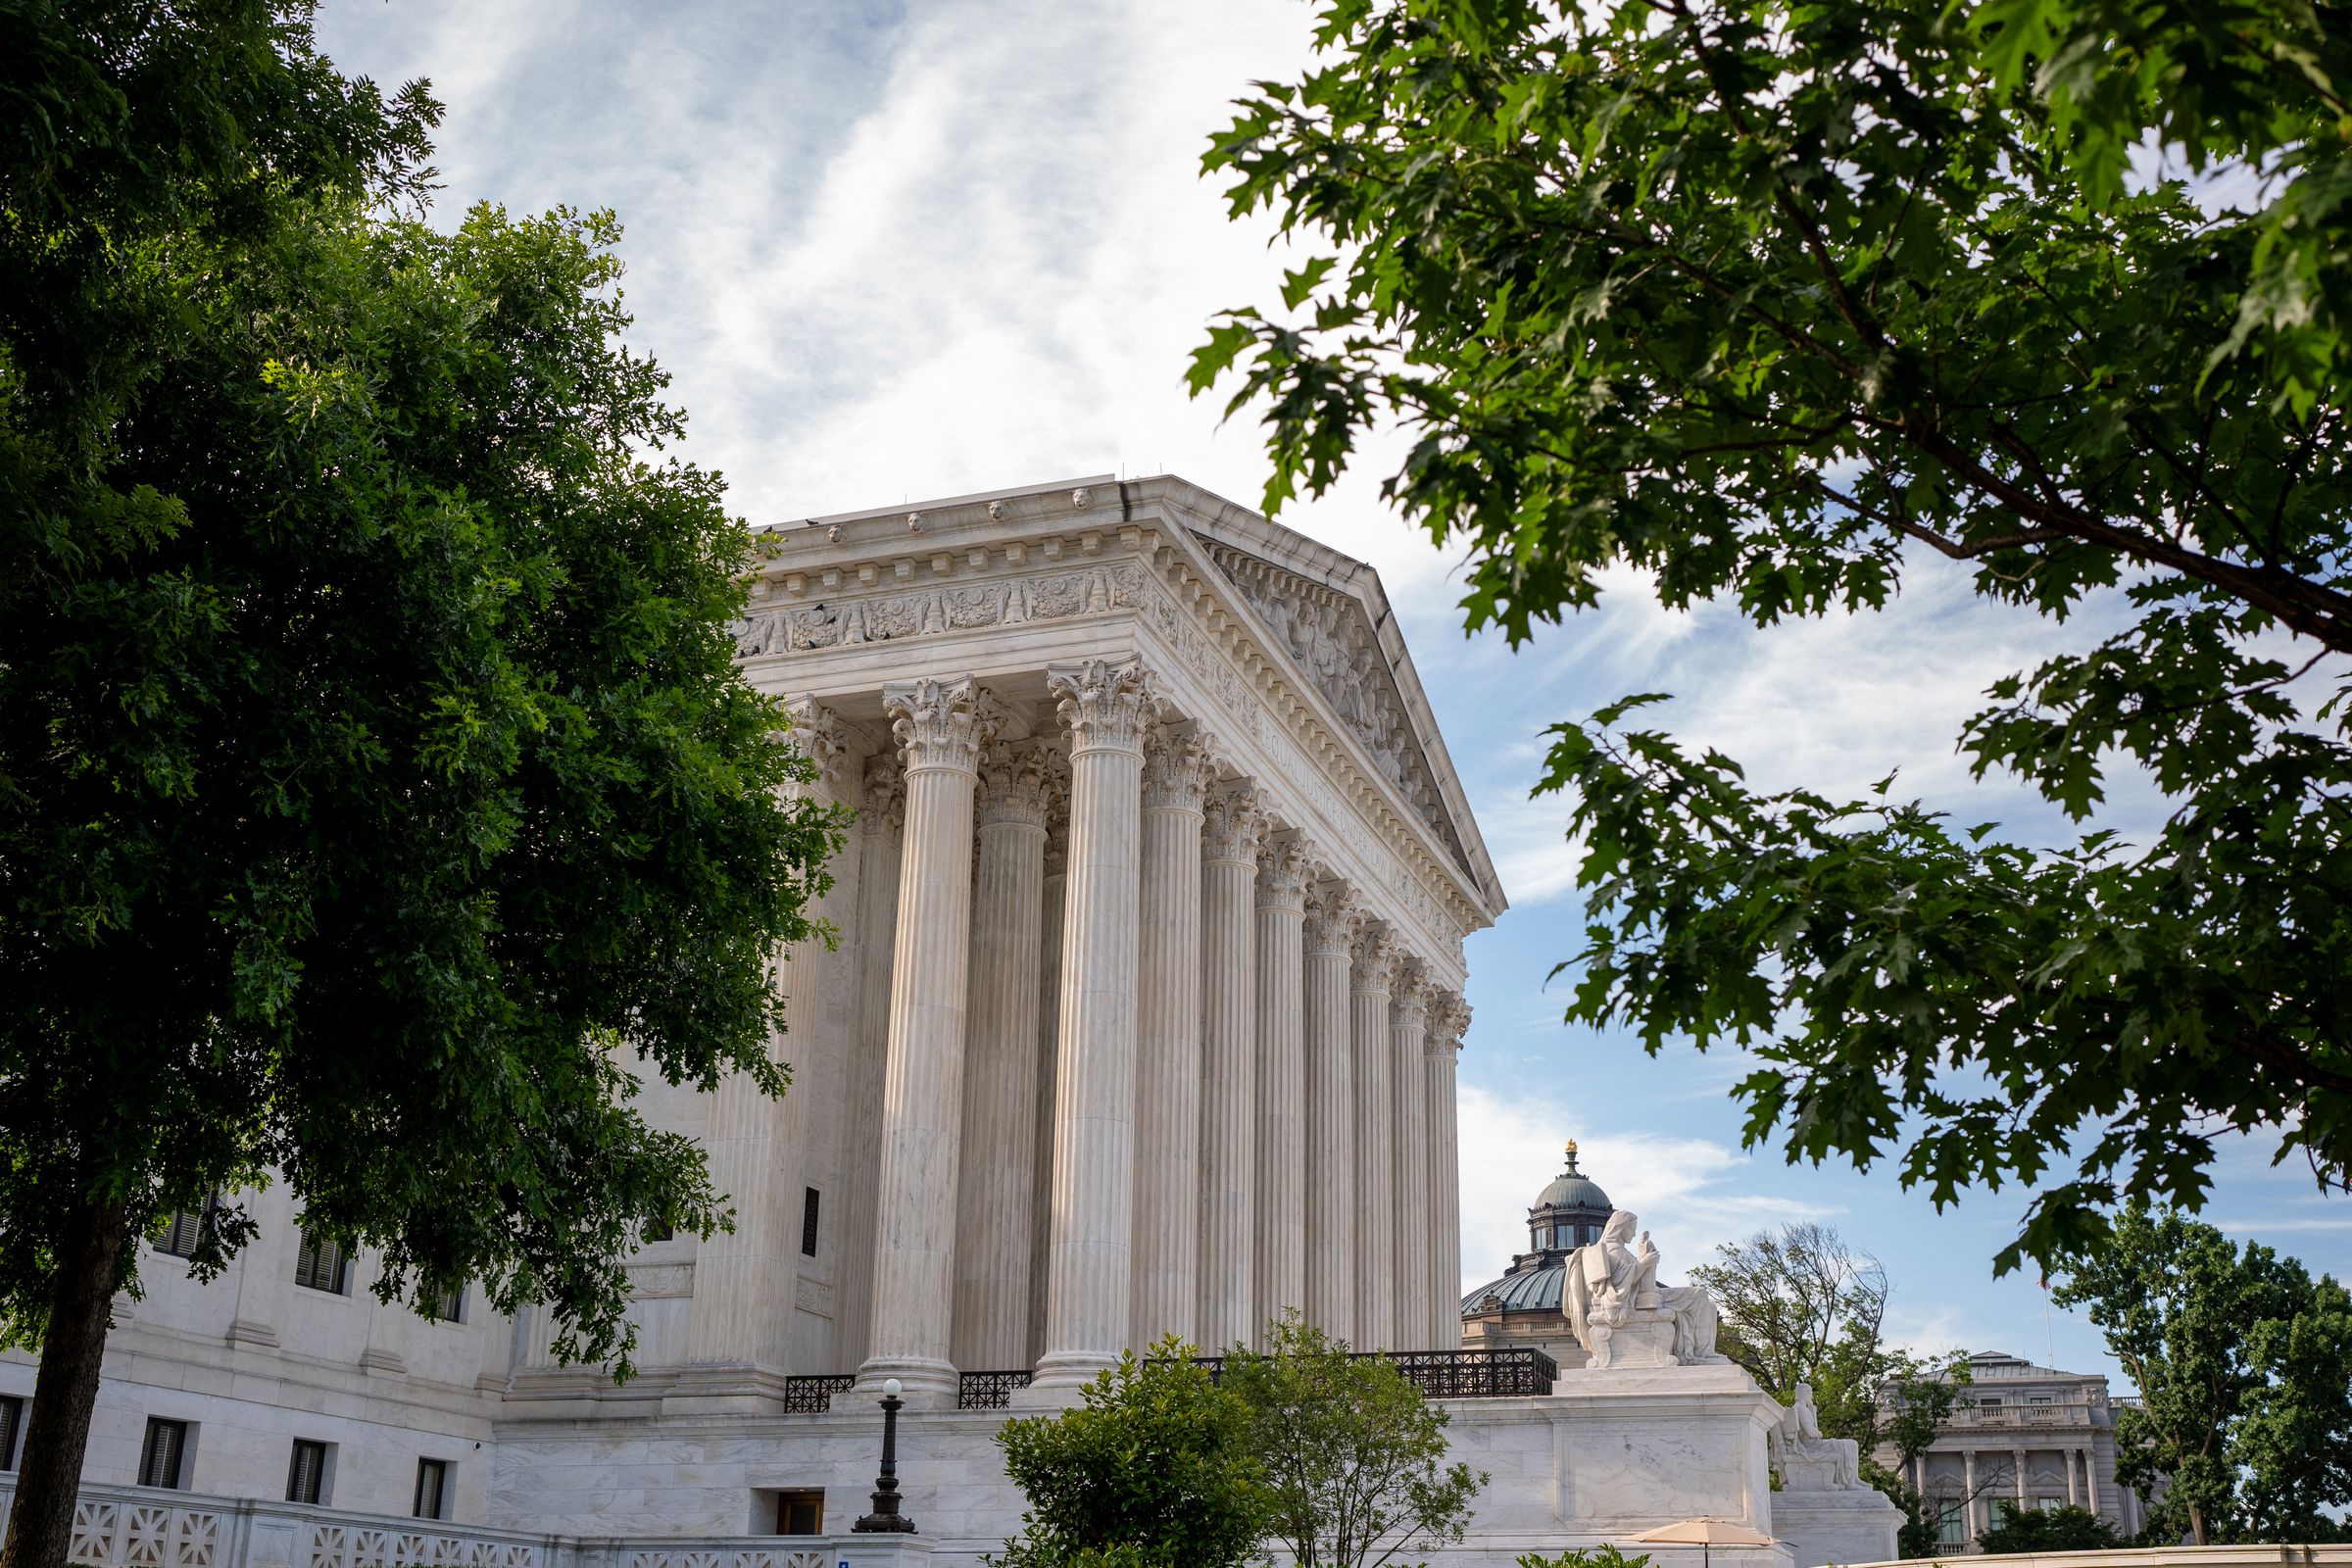 A view of the Supreme Court from the side, partly obstructed by tree foliage.